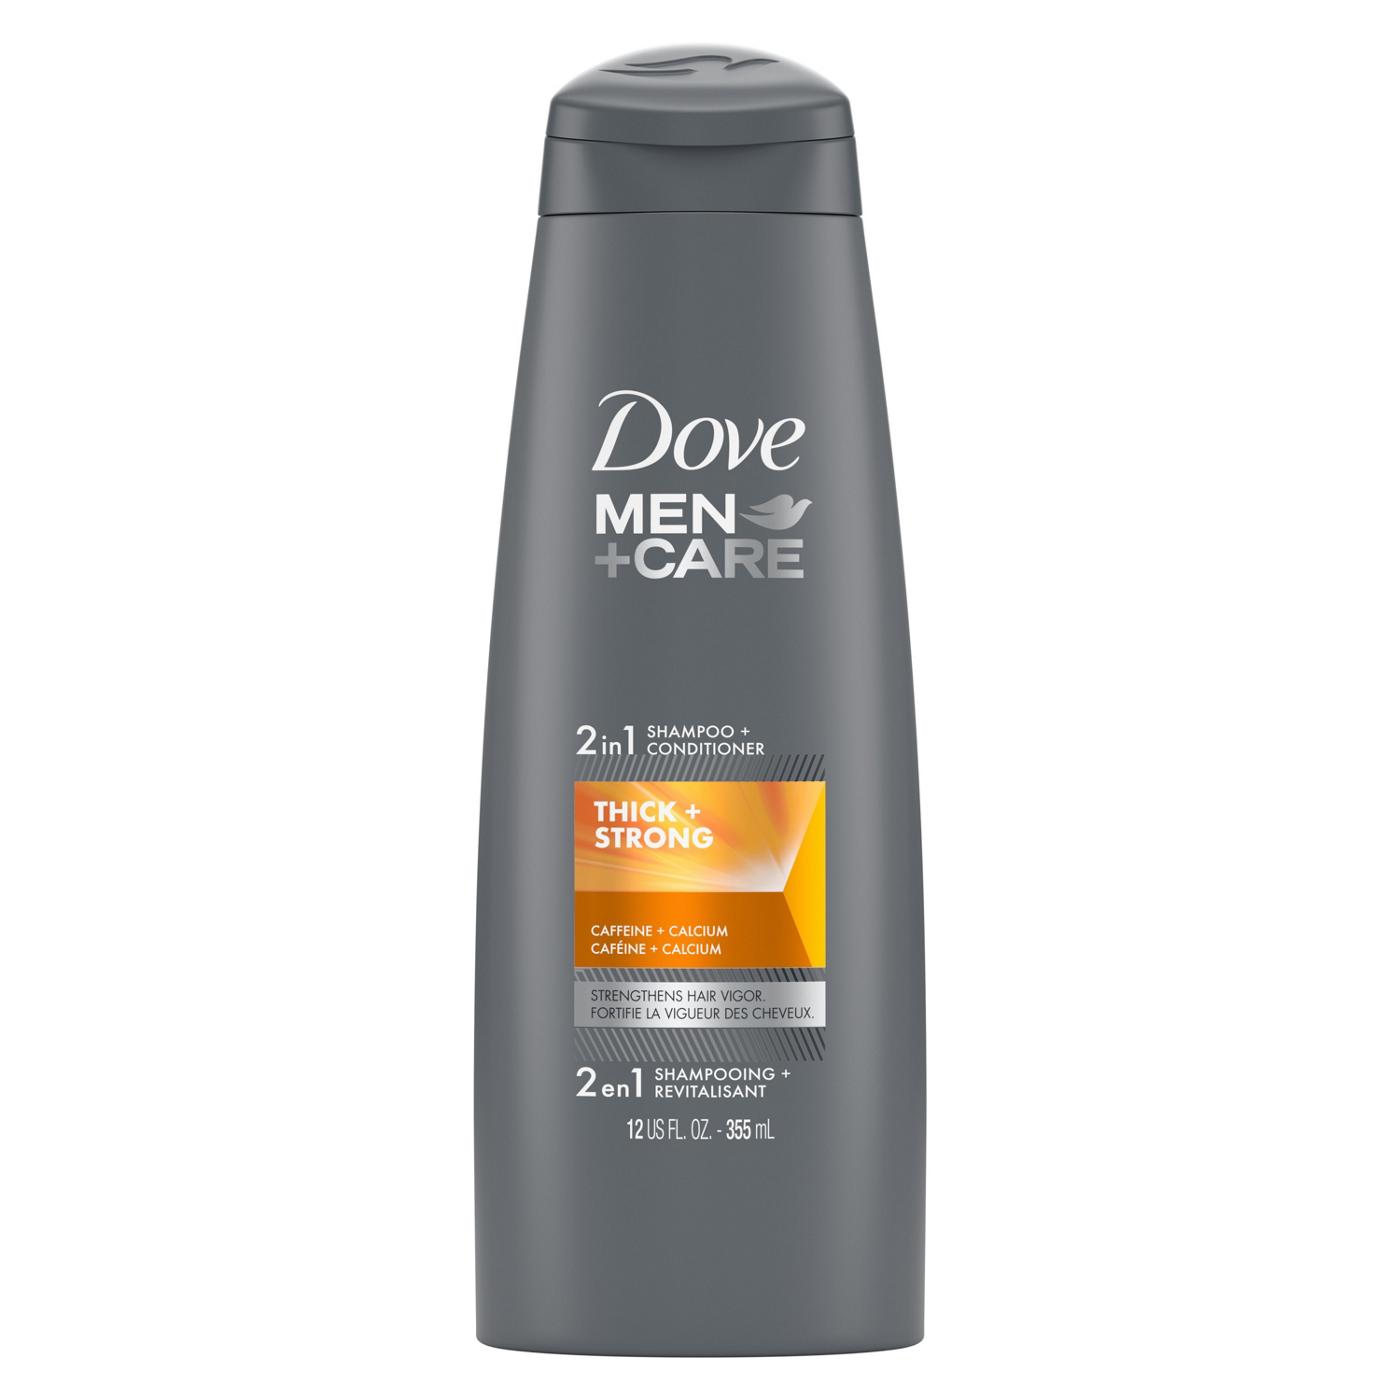 Dove Men+Care 2 in 1 Shampoo + Conditioner - Thick + Strong; image 1 of 5